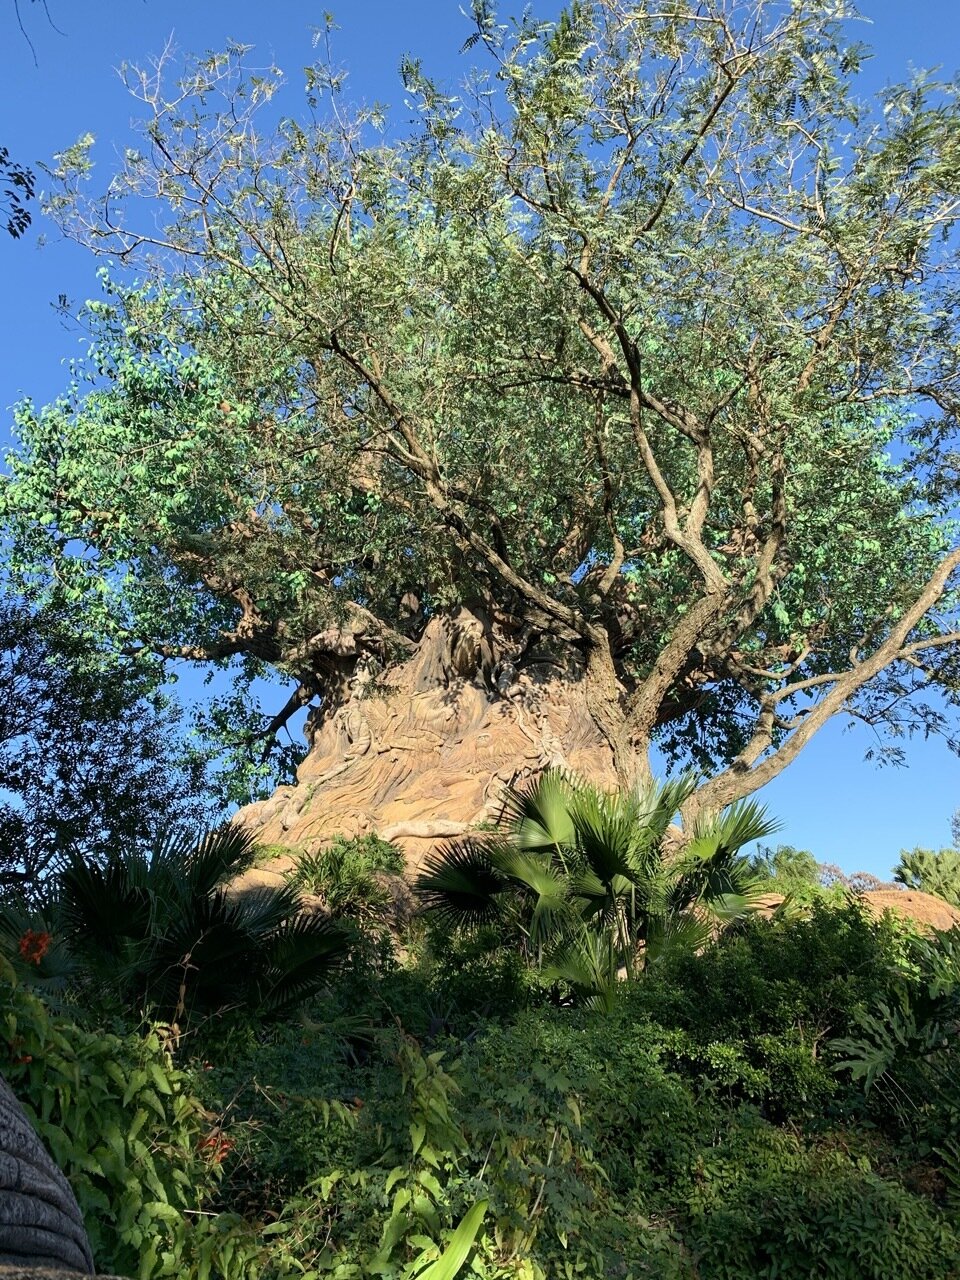 https://www.mousehacking.com/blog/how-to-see-the-tree-of-life-at-animal-kingdom-up-close